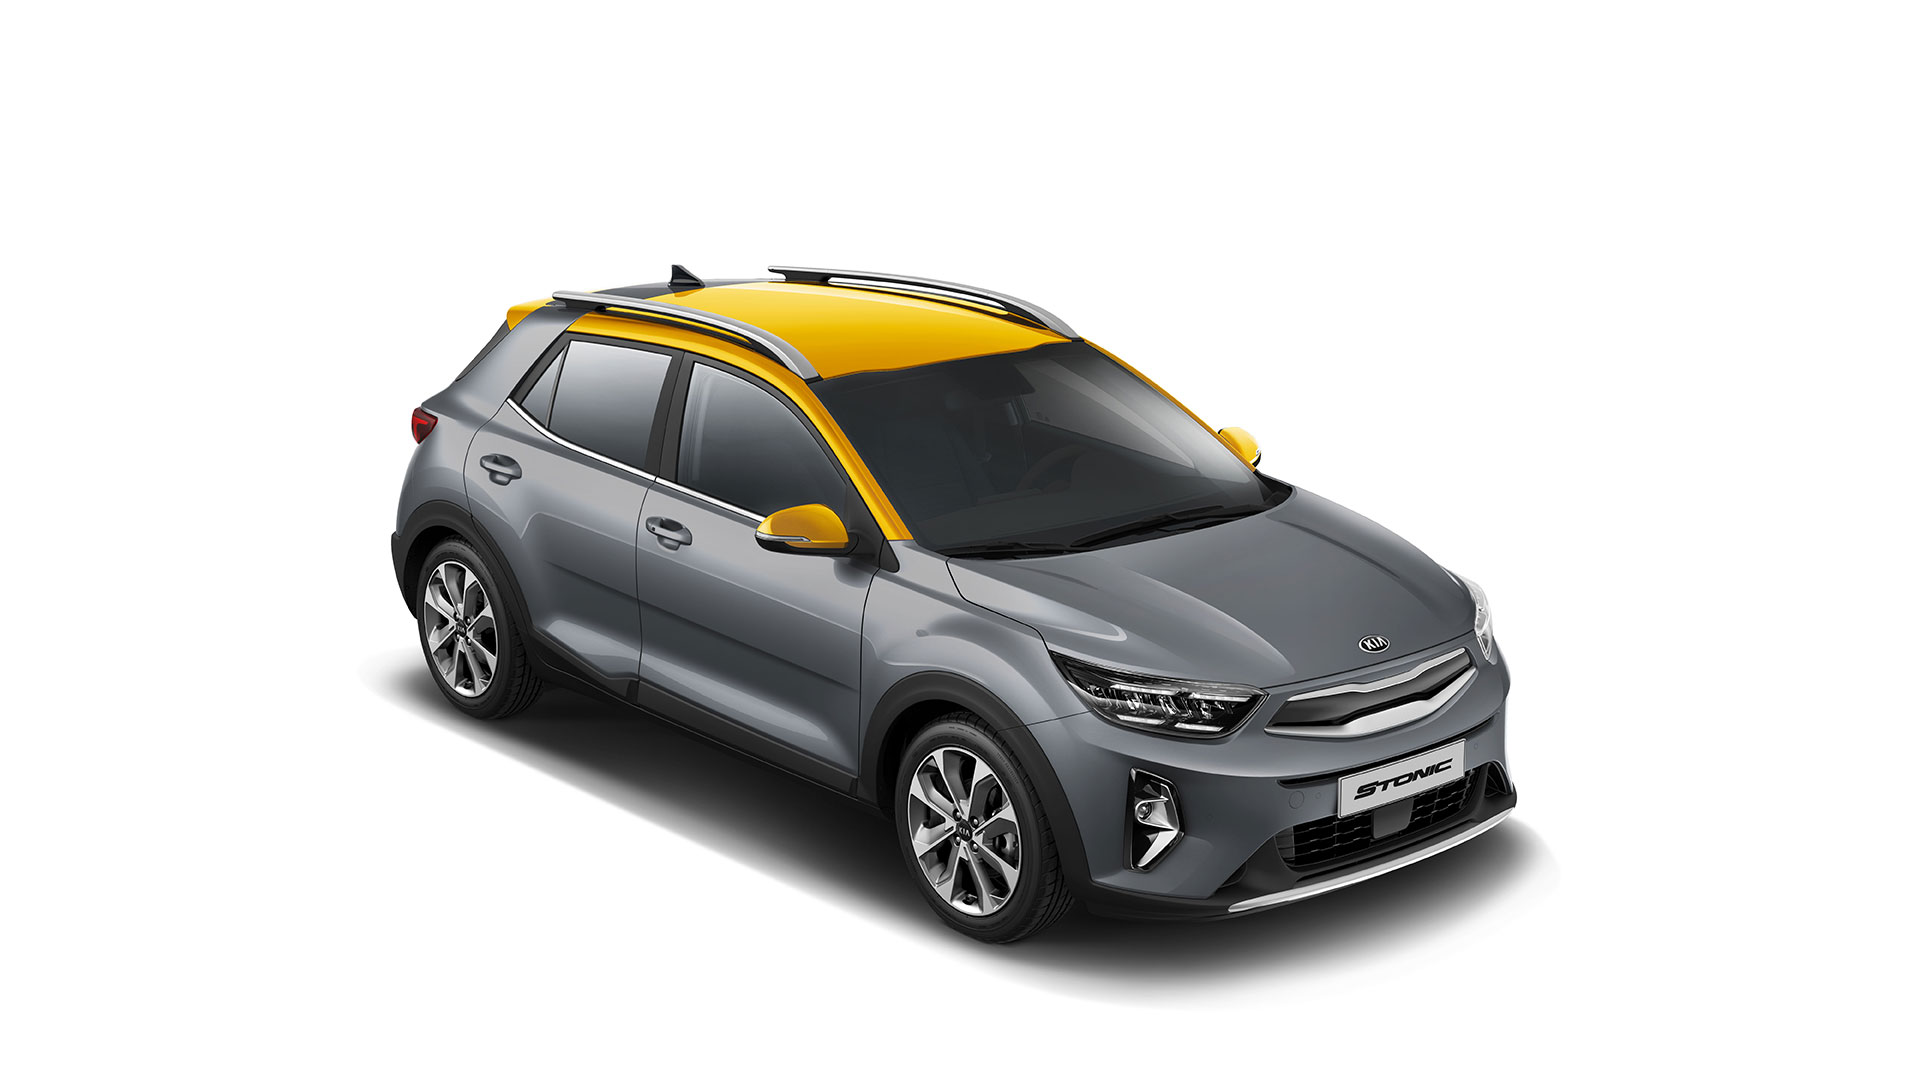 2020 Kia Stonic Gets EcoDynamics+ in Europe, Also Better Connected